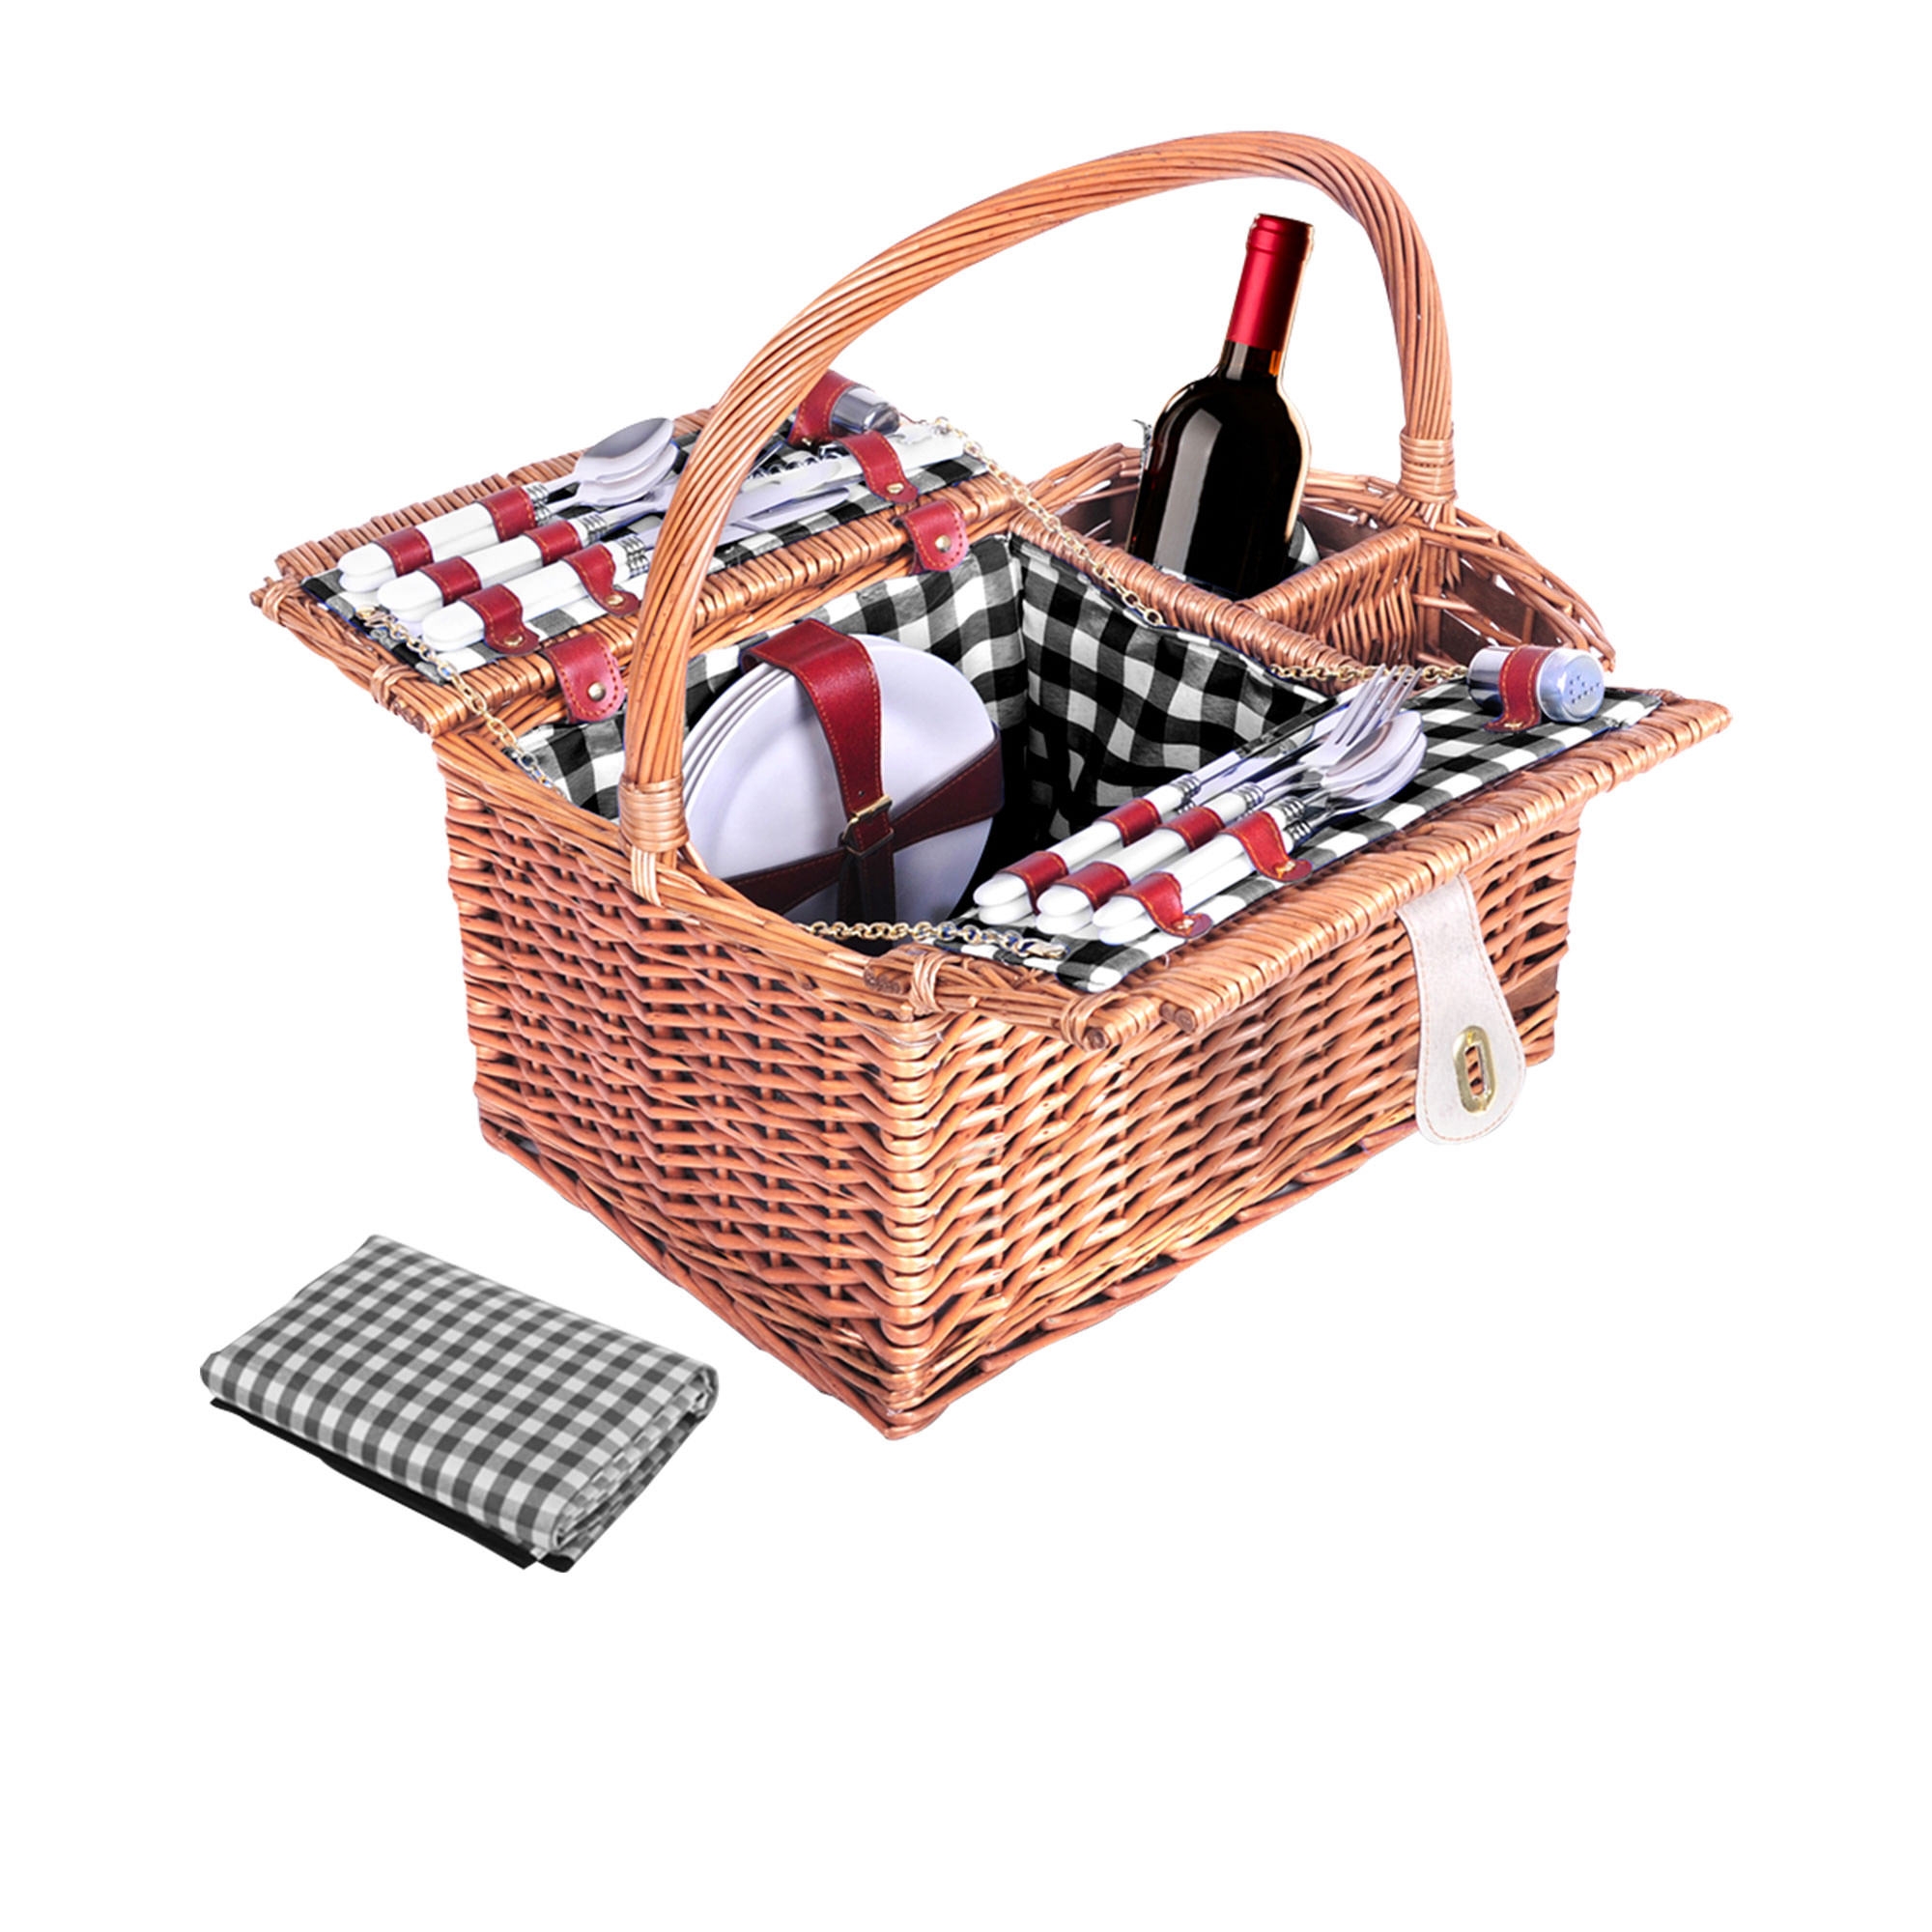 Alfresco 4 Person Deluxe Picnic Basket with Black/White Check Blanket Image 1